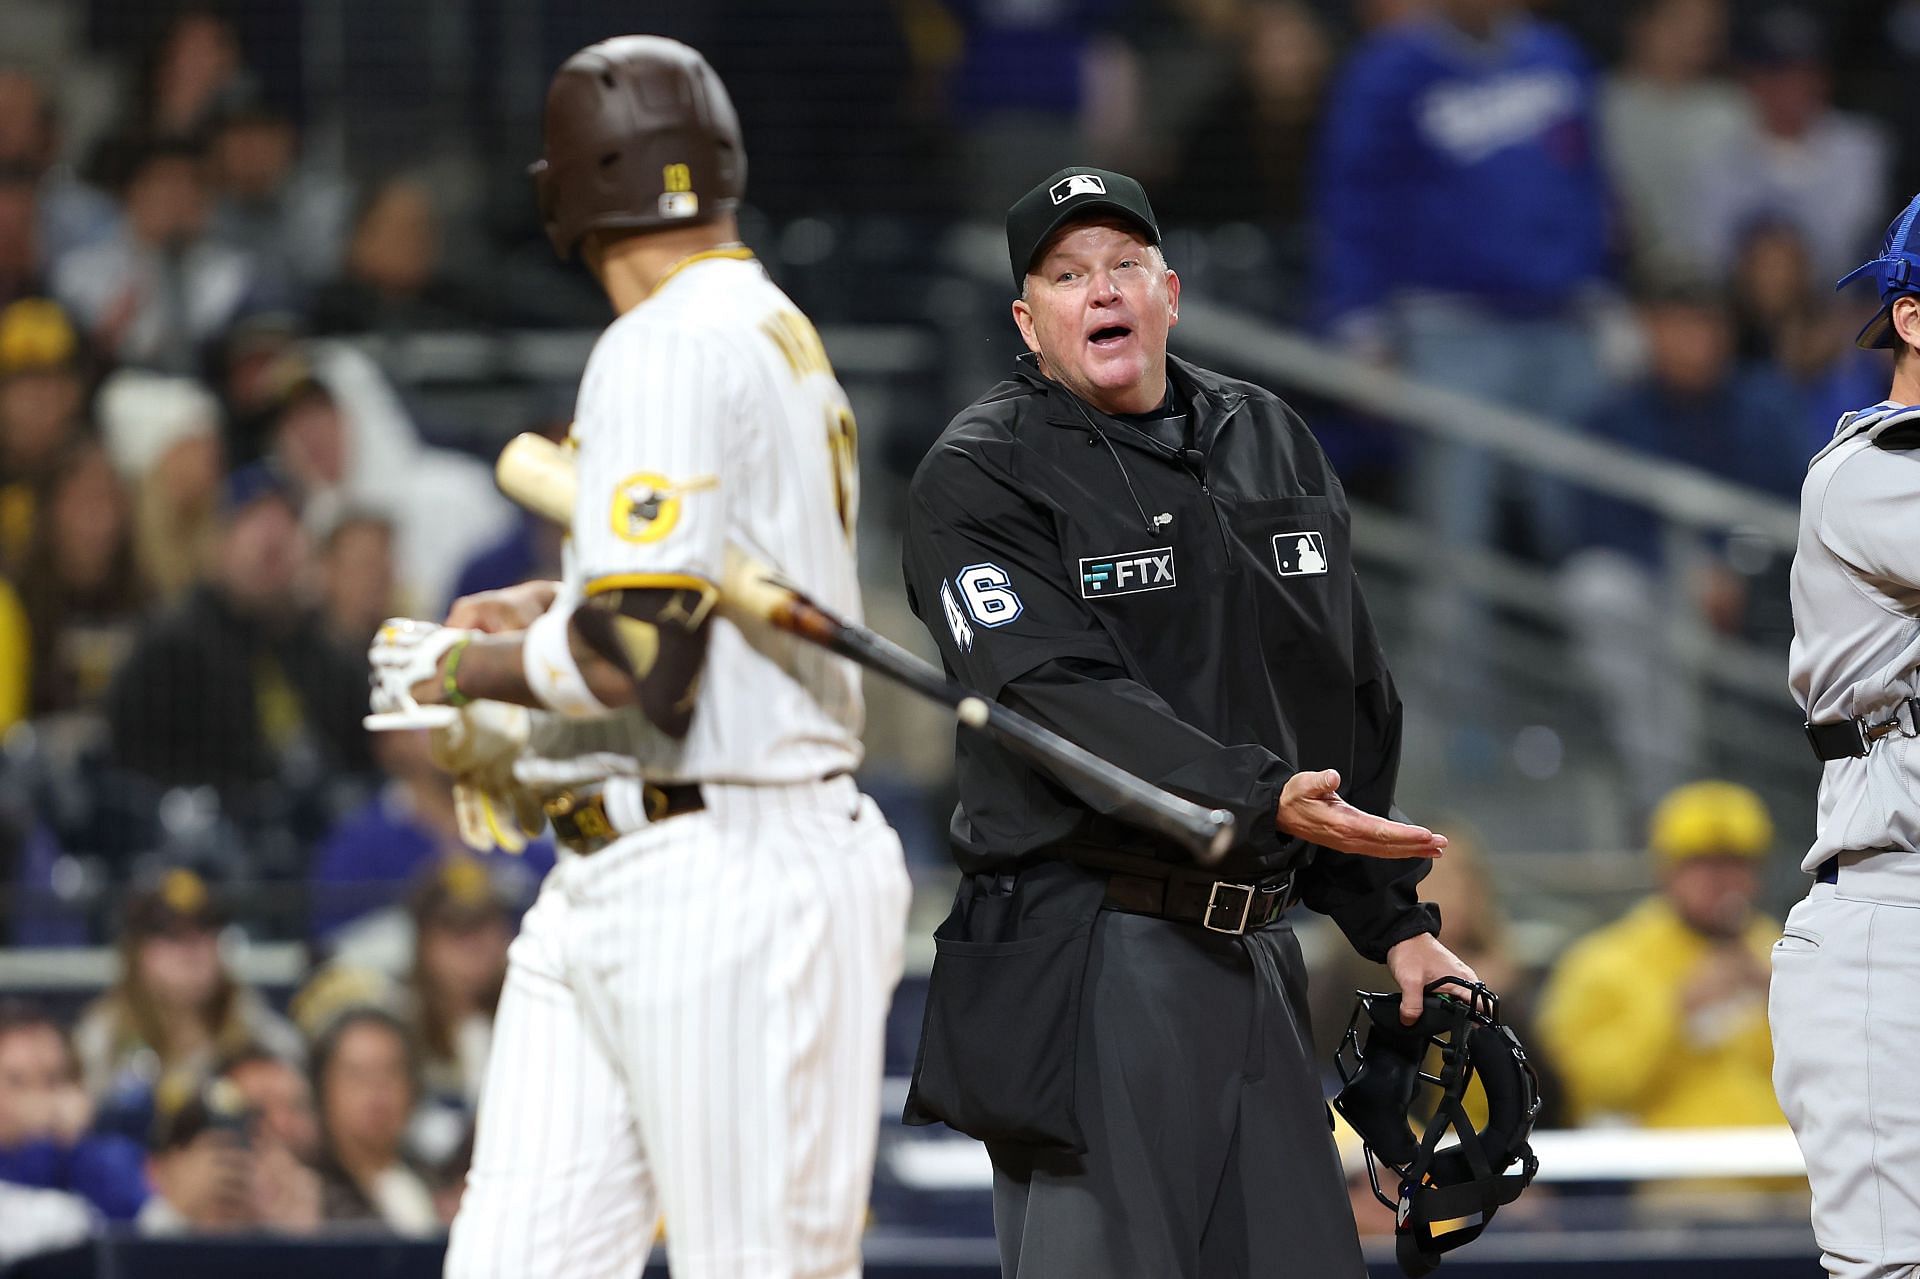 MLB 2022 5 MLB Umpires in the hot seat